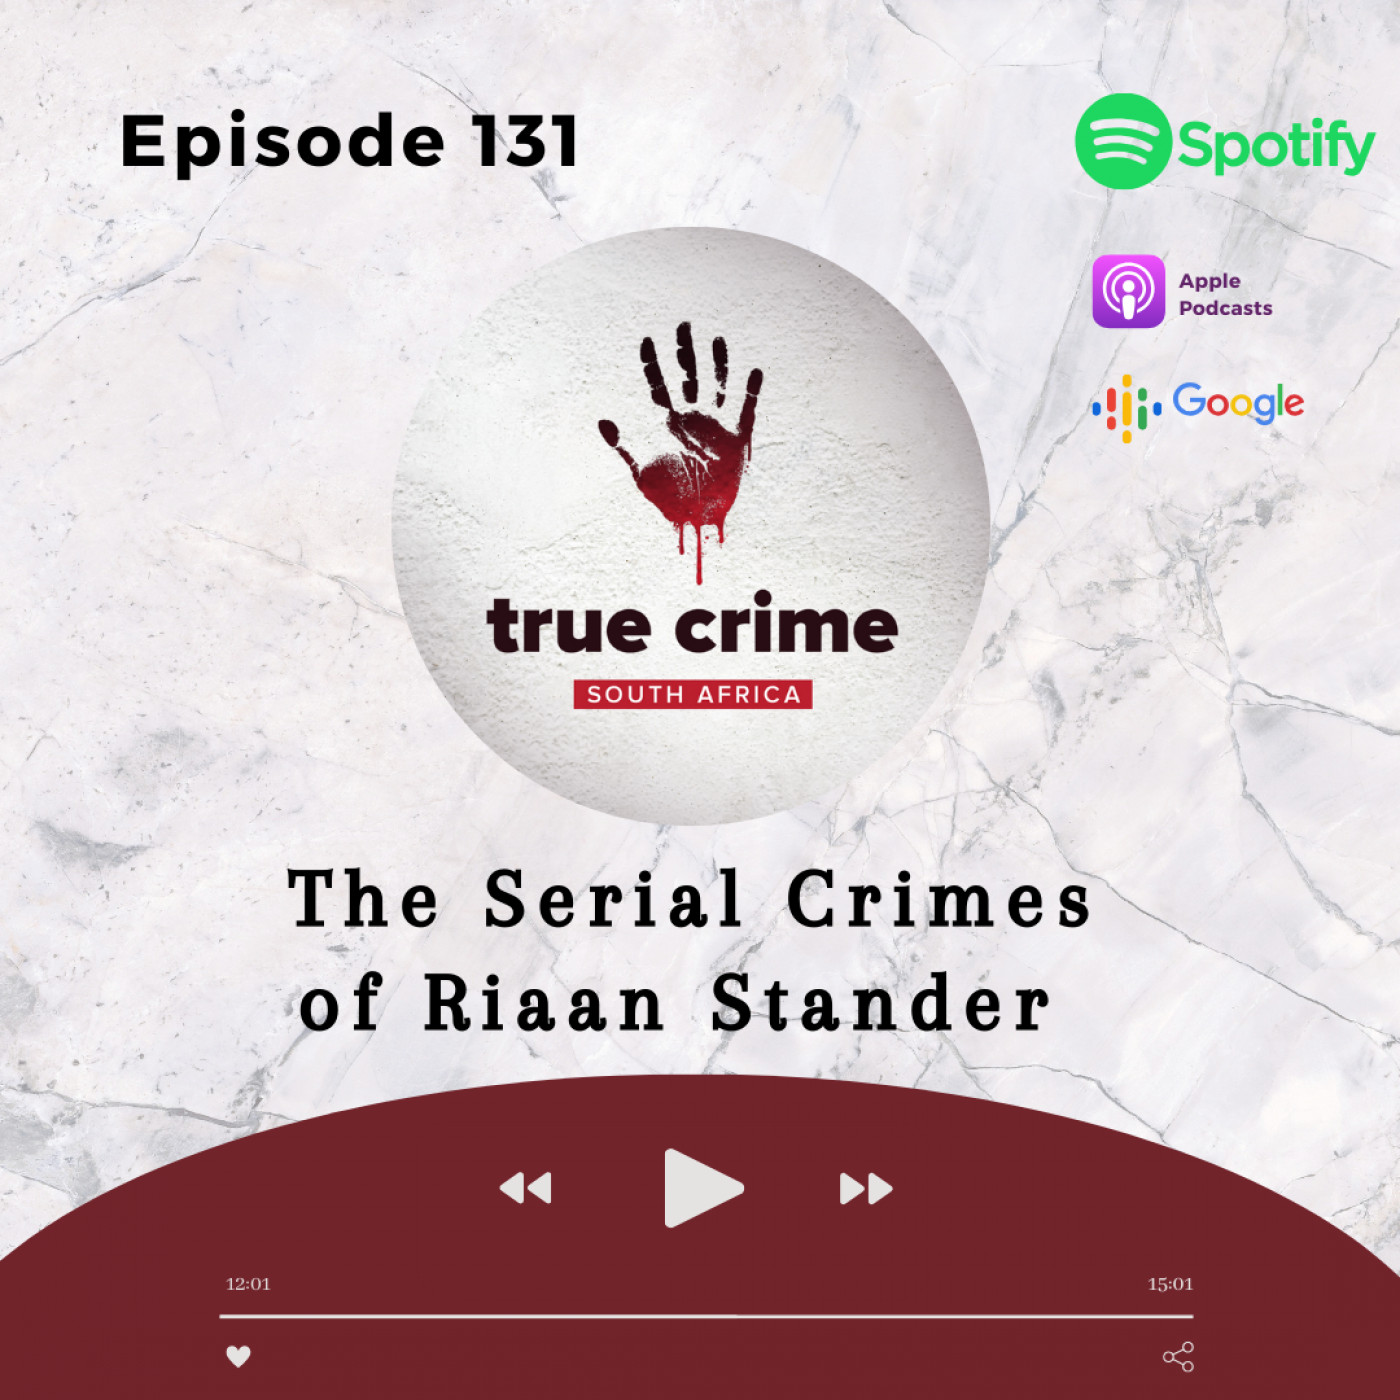 Episode 131 The Serial Crimes of Riaan Stander